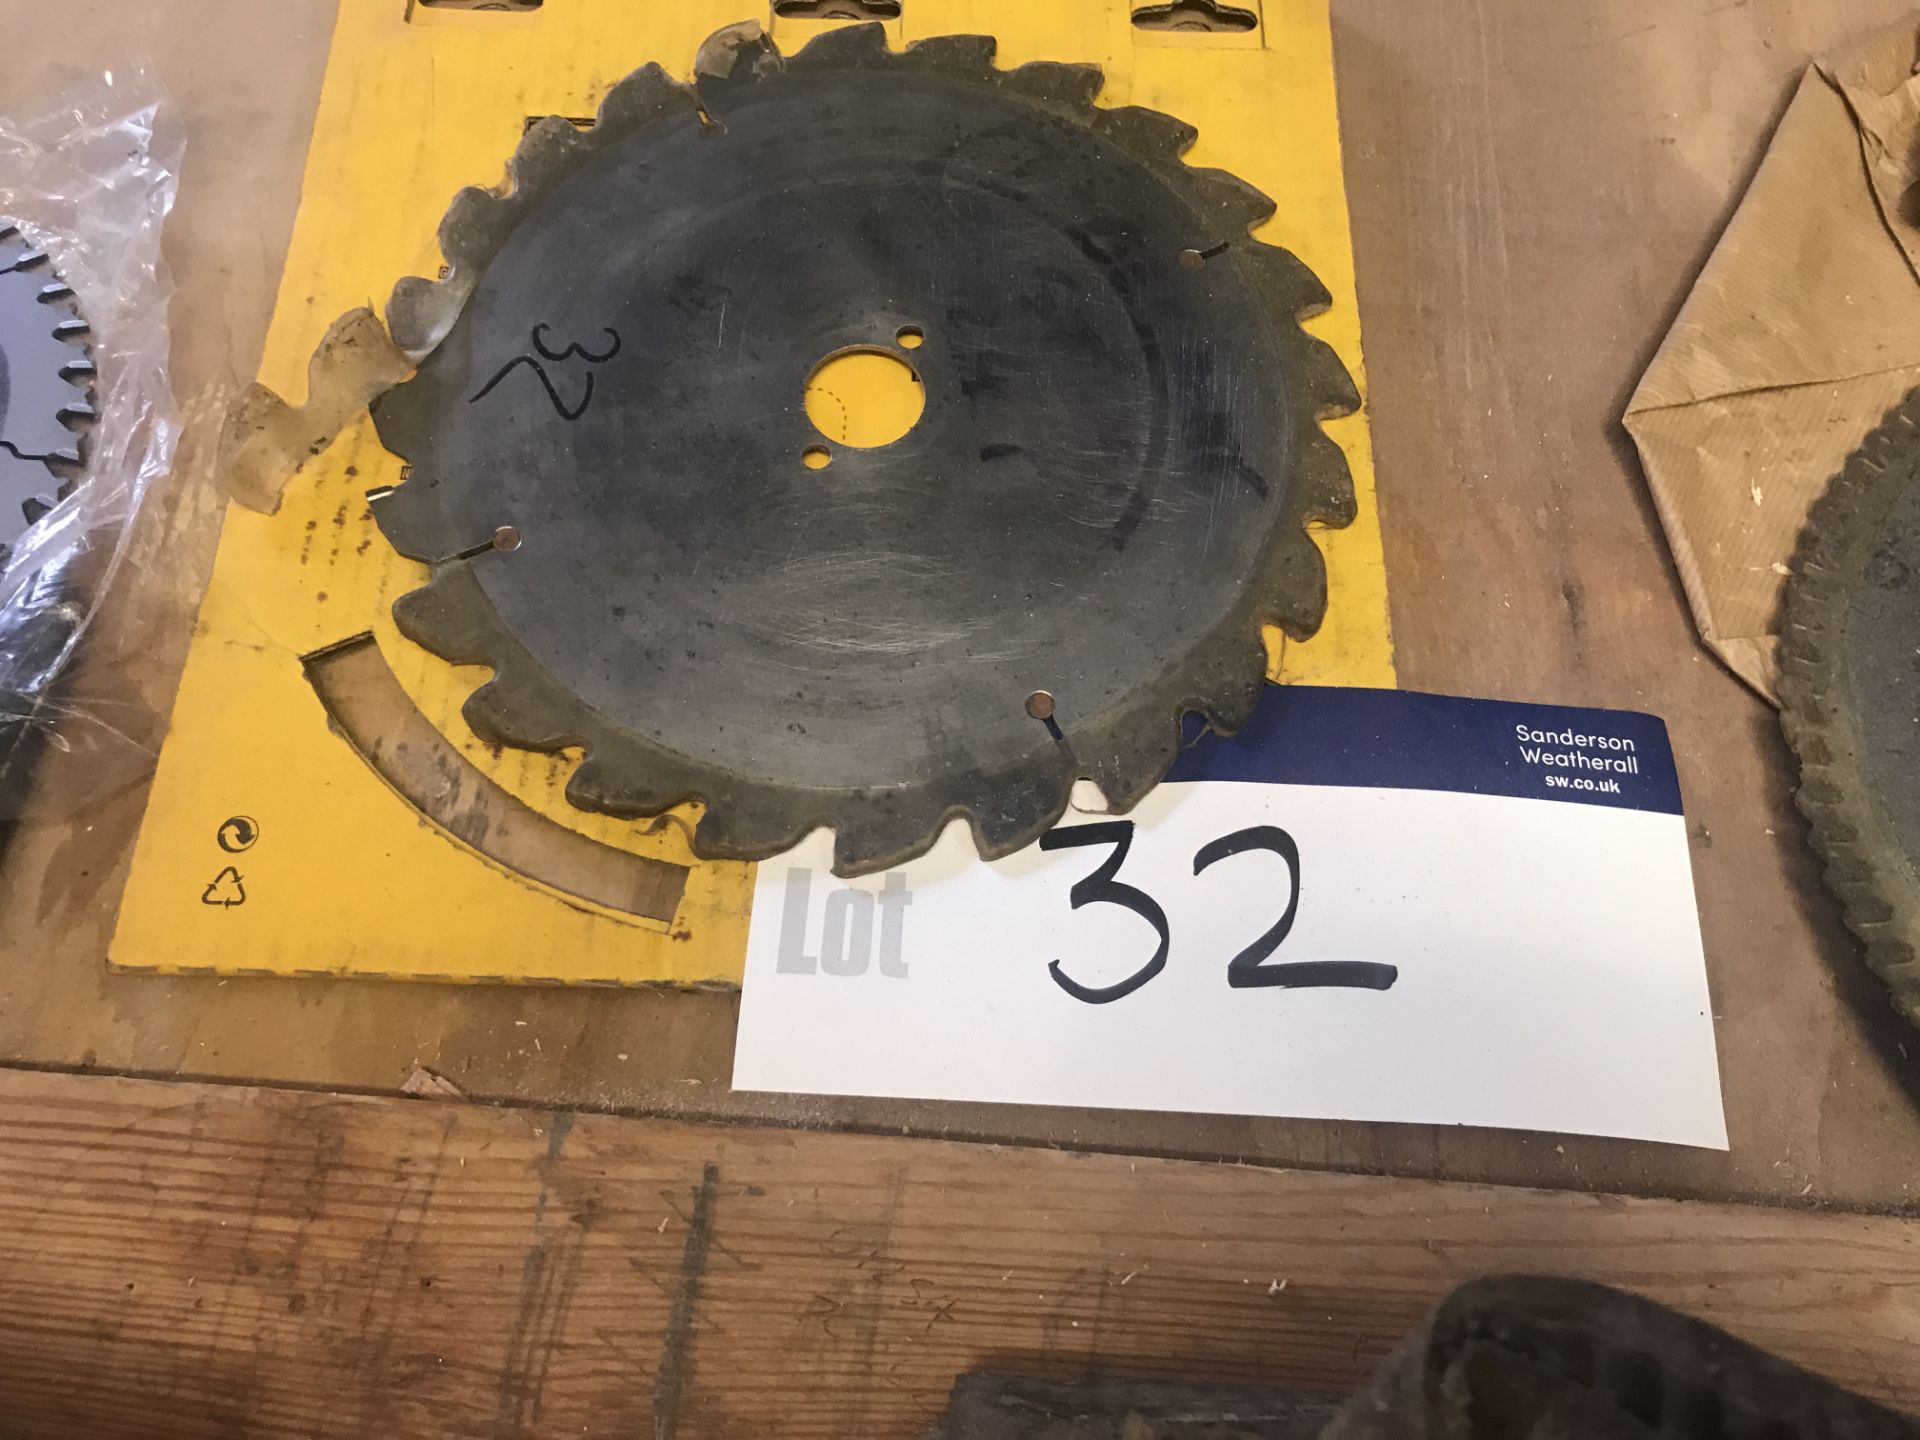 Carbon Tip Saw Blade, approx. 245mm dia. x approx. 30mm spindle board (note zero vat on hammer